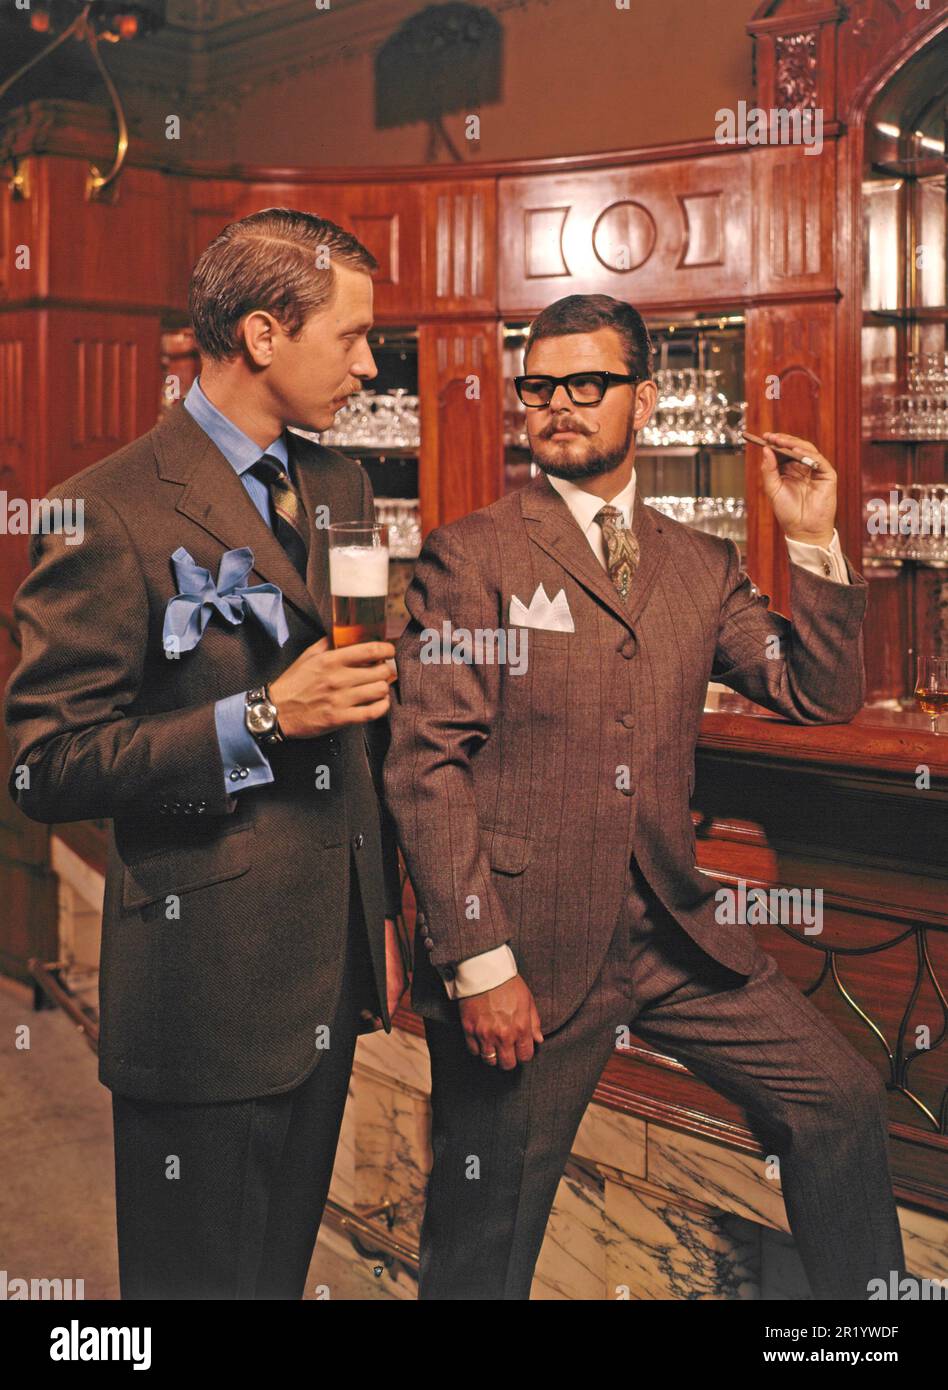 In the 1960s. Two well dressed men pictured in a bar. Sweden 1965 BV95 Stock Photo